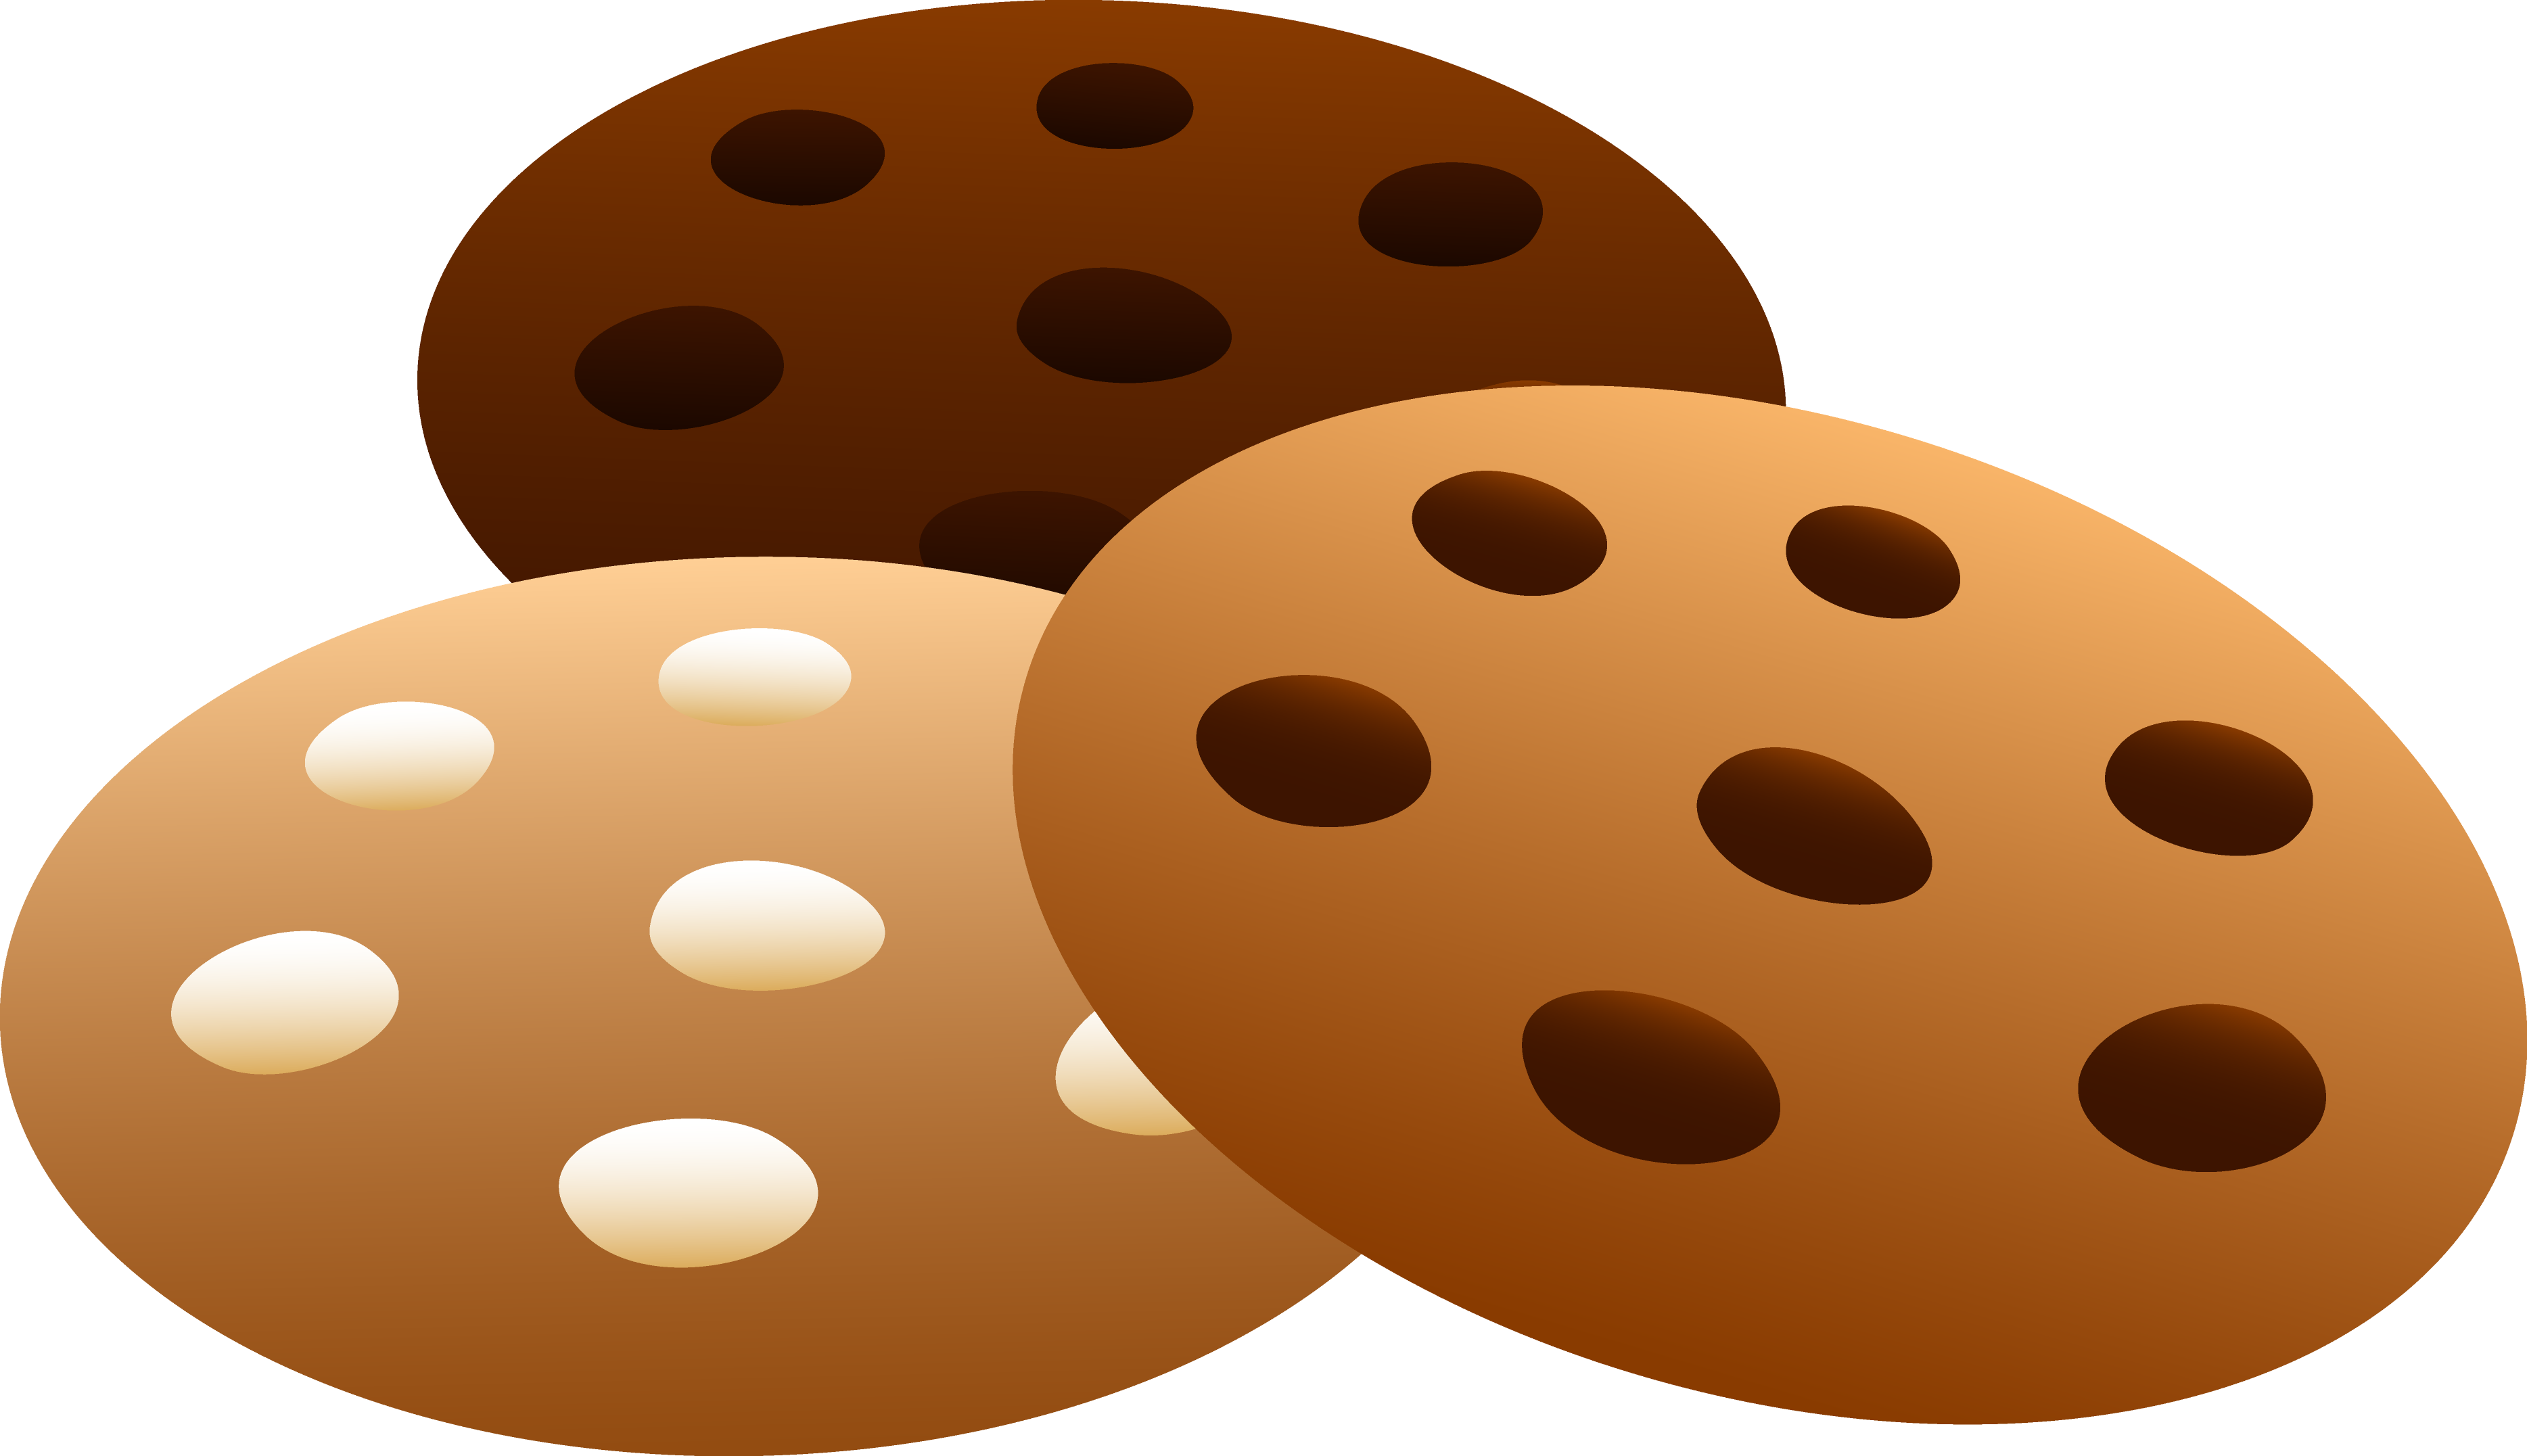 chocolate chip cookie clipart